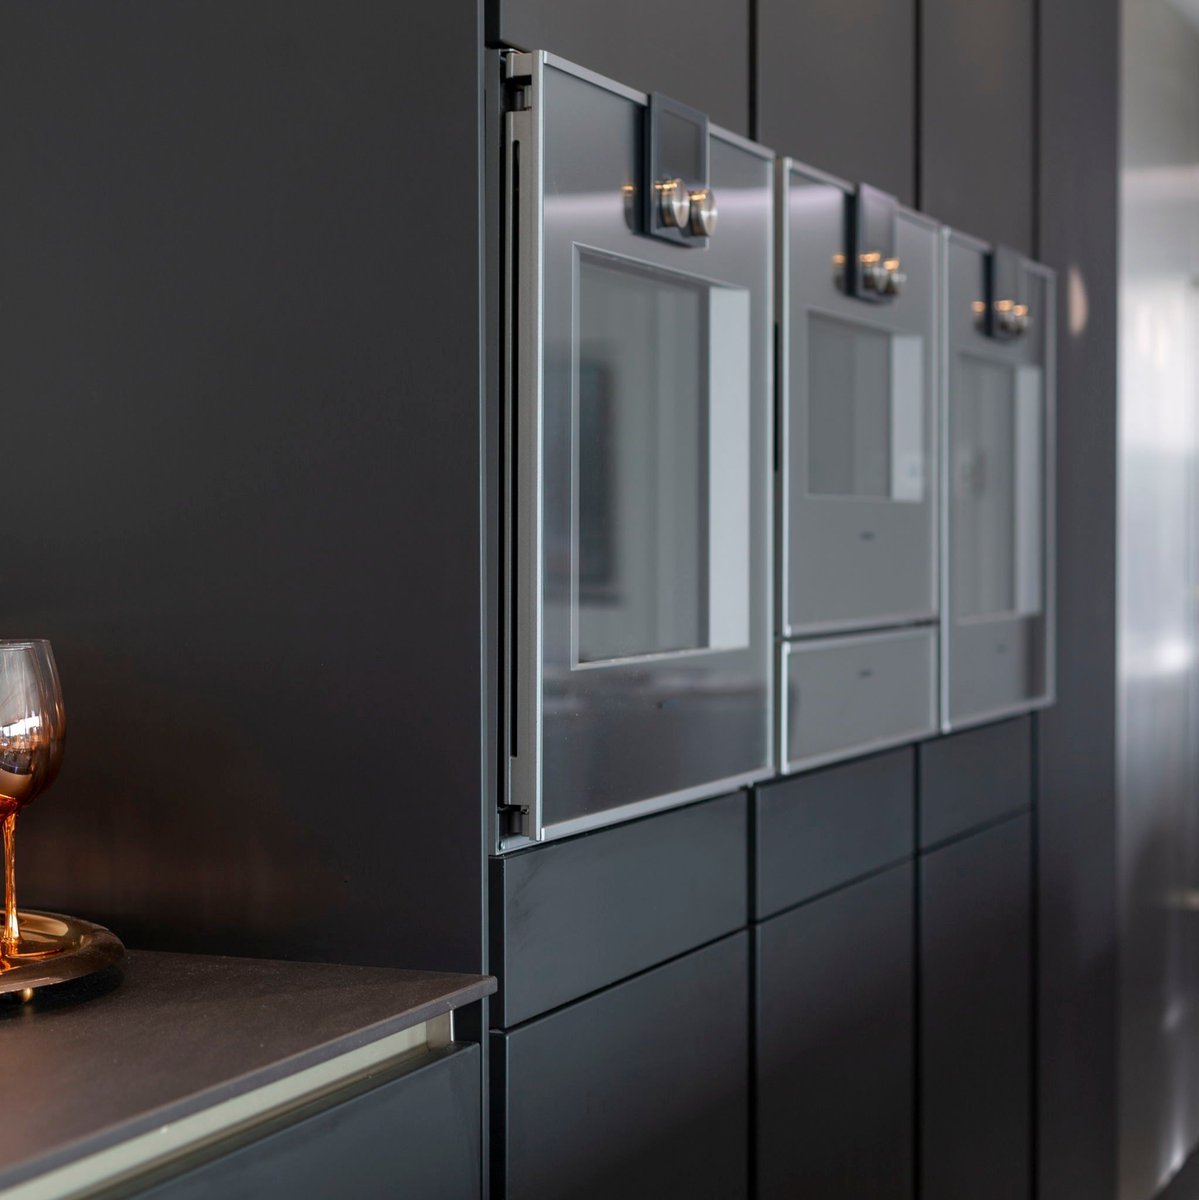 Gaggenau ovens are well known for their exceptional quality and innovative features, making them a preferred option for both cooking enthusiasts and professional chefs. 

#gaggenau #openkitchen #leadingdesign #kitchendesign #luxurykitchen #interiorliving #interiordesign